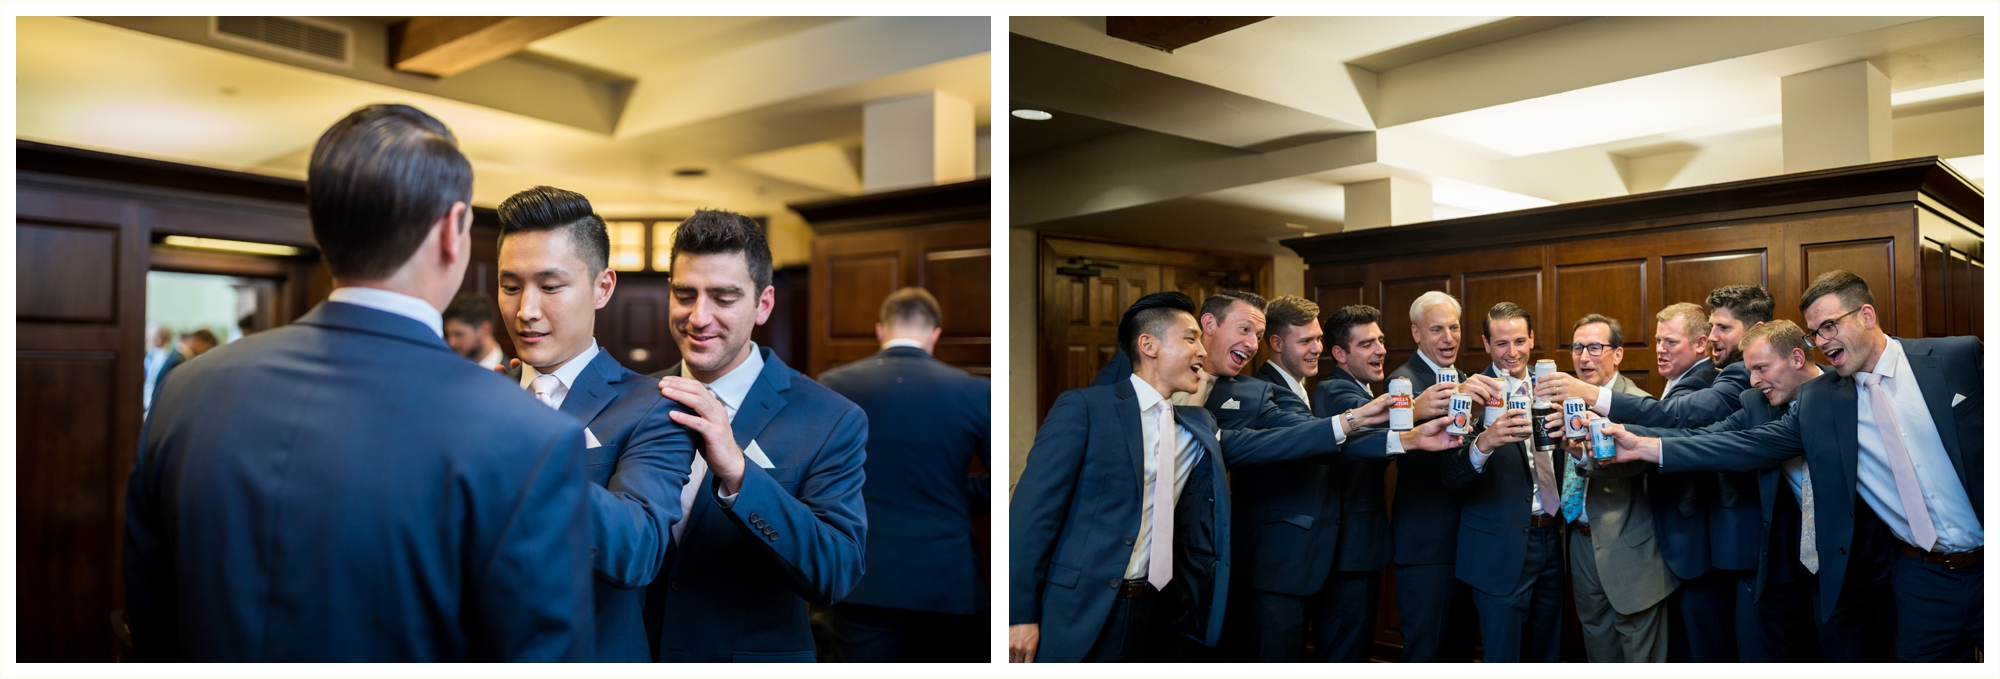 groom and groomsmen during getting ready at sanctuary golf course in castle pines